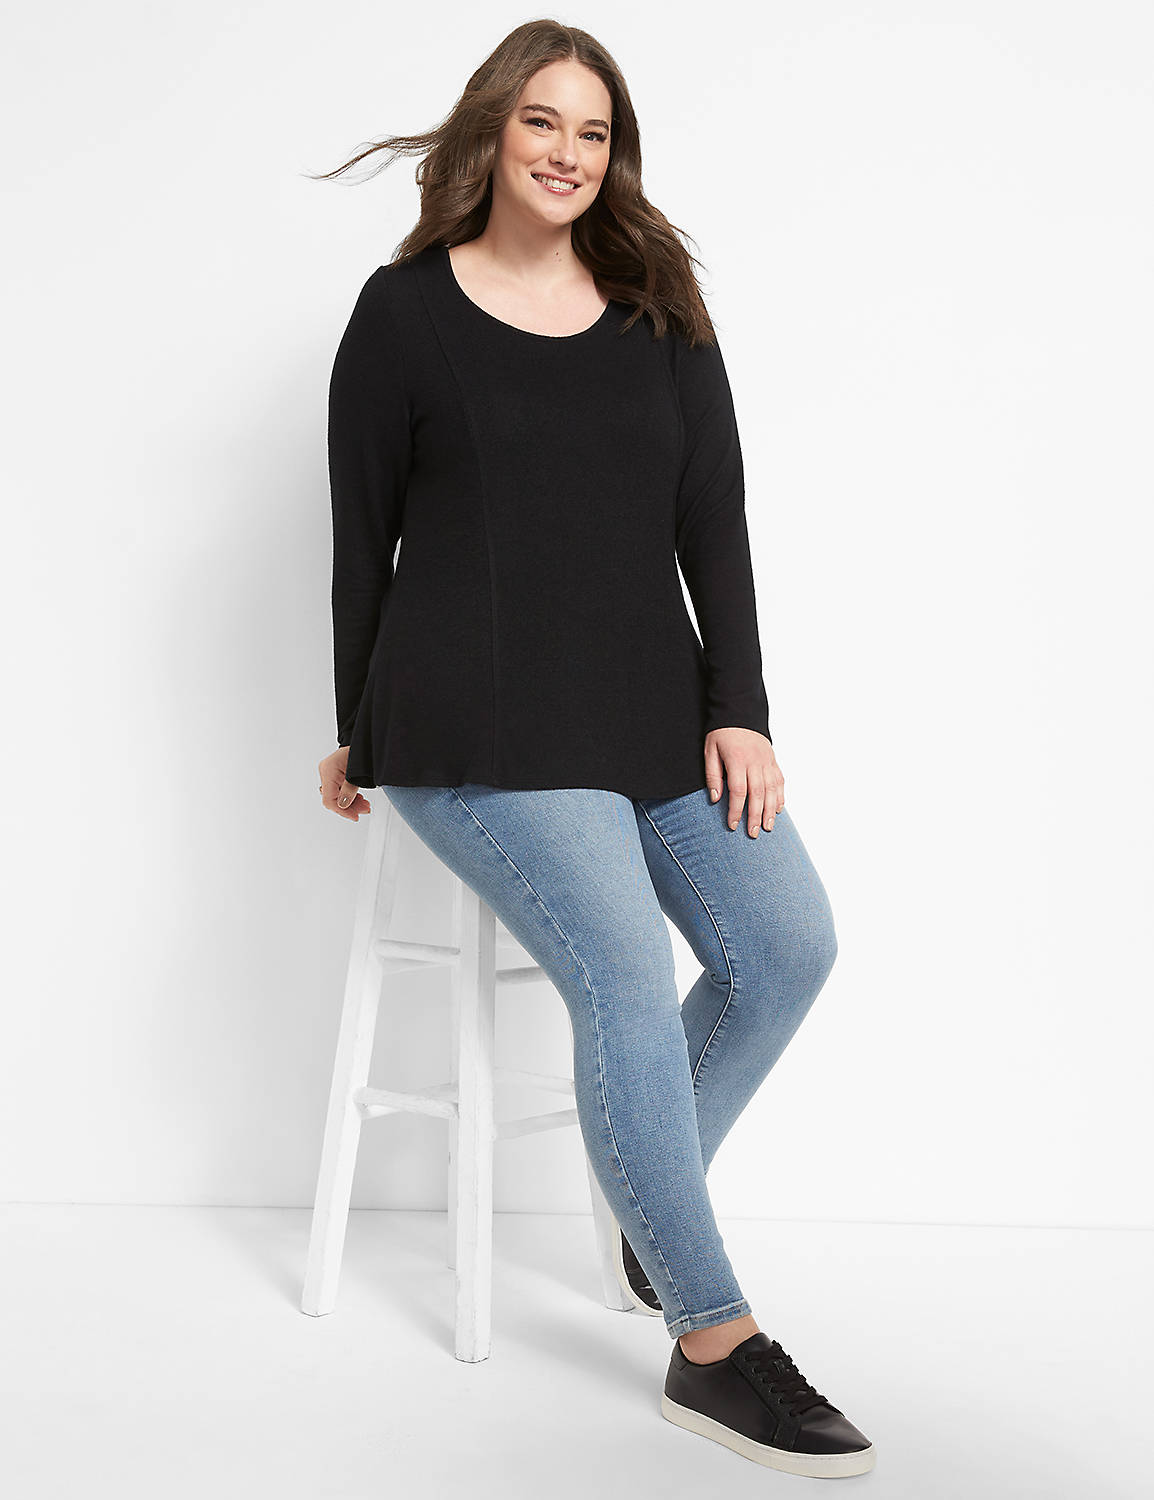 Long Sleeve Scoop Neck Fit and Flare Hacci Top Solid 1123730:Ascena Black:30/32 Product Image 3